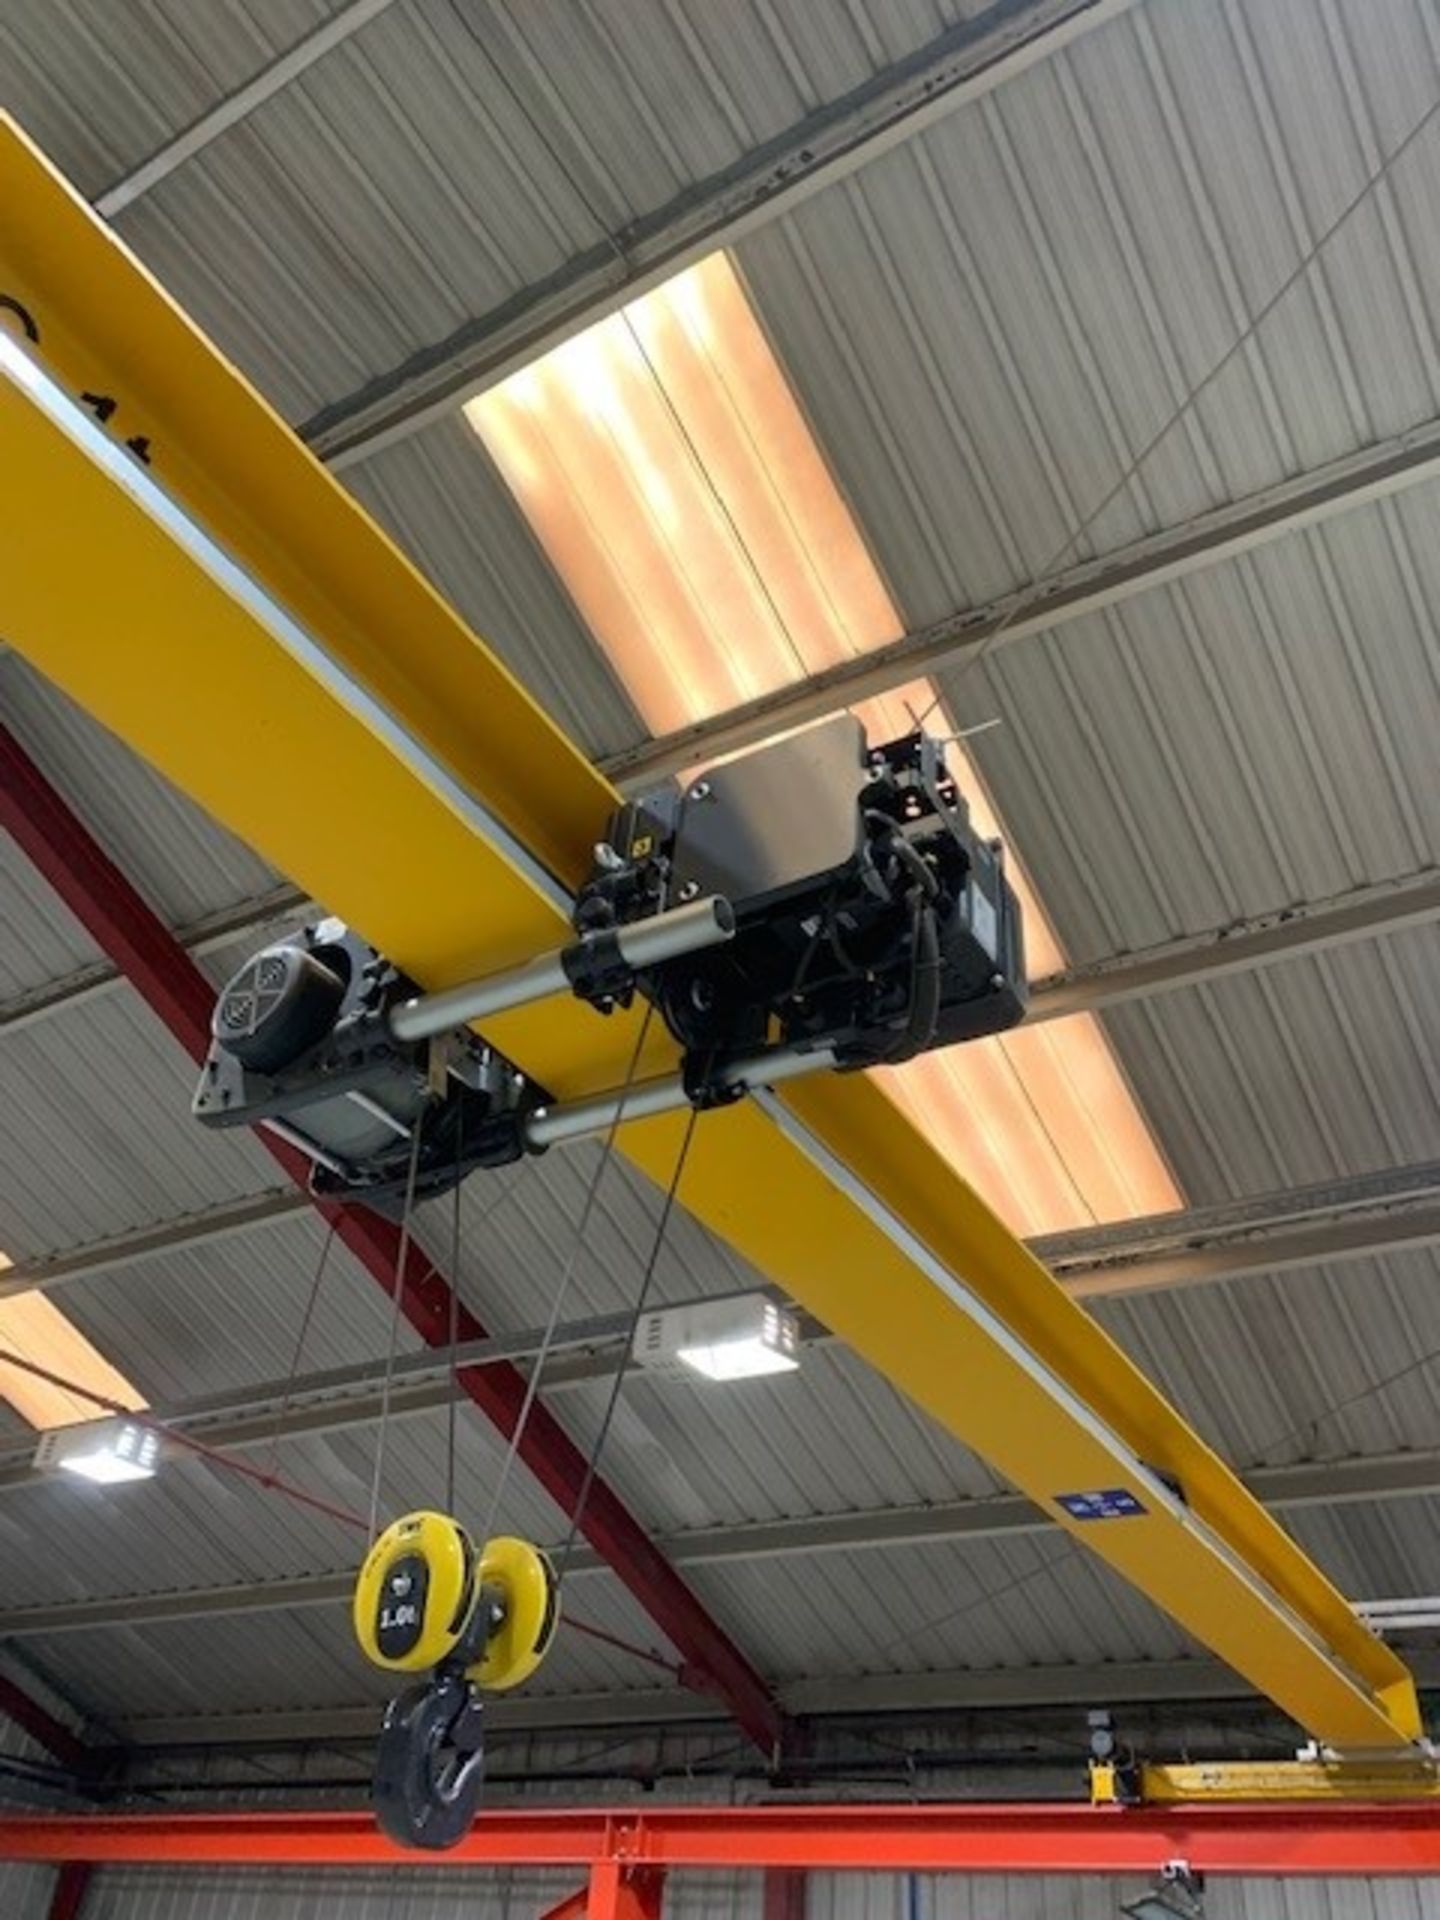 (2) Granada Model RC 1T 1 Tonne Remote Controlled Overhead Cranes (2017) 13m Span x 3.206m High on F - Image 13 of 18